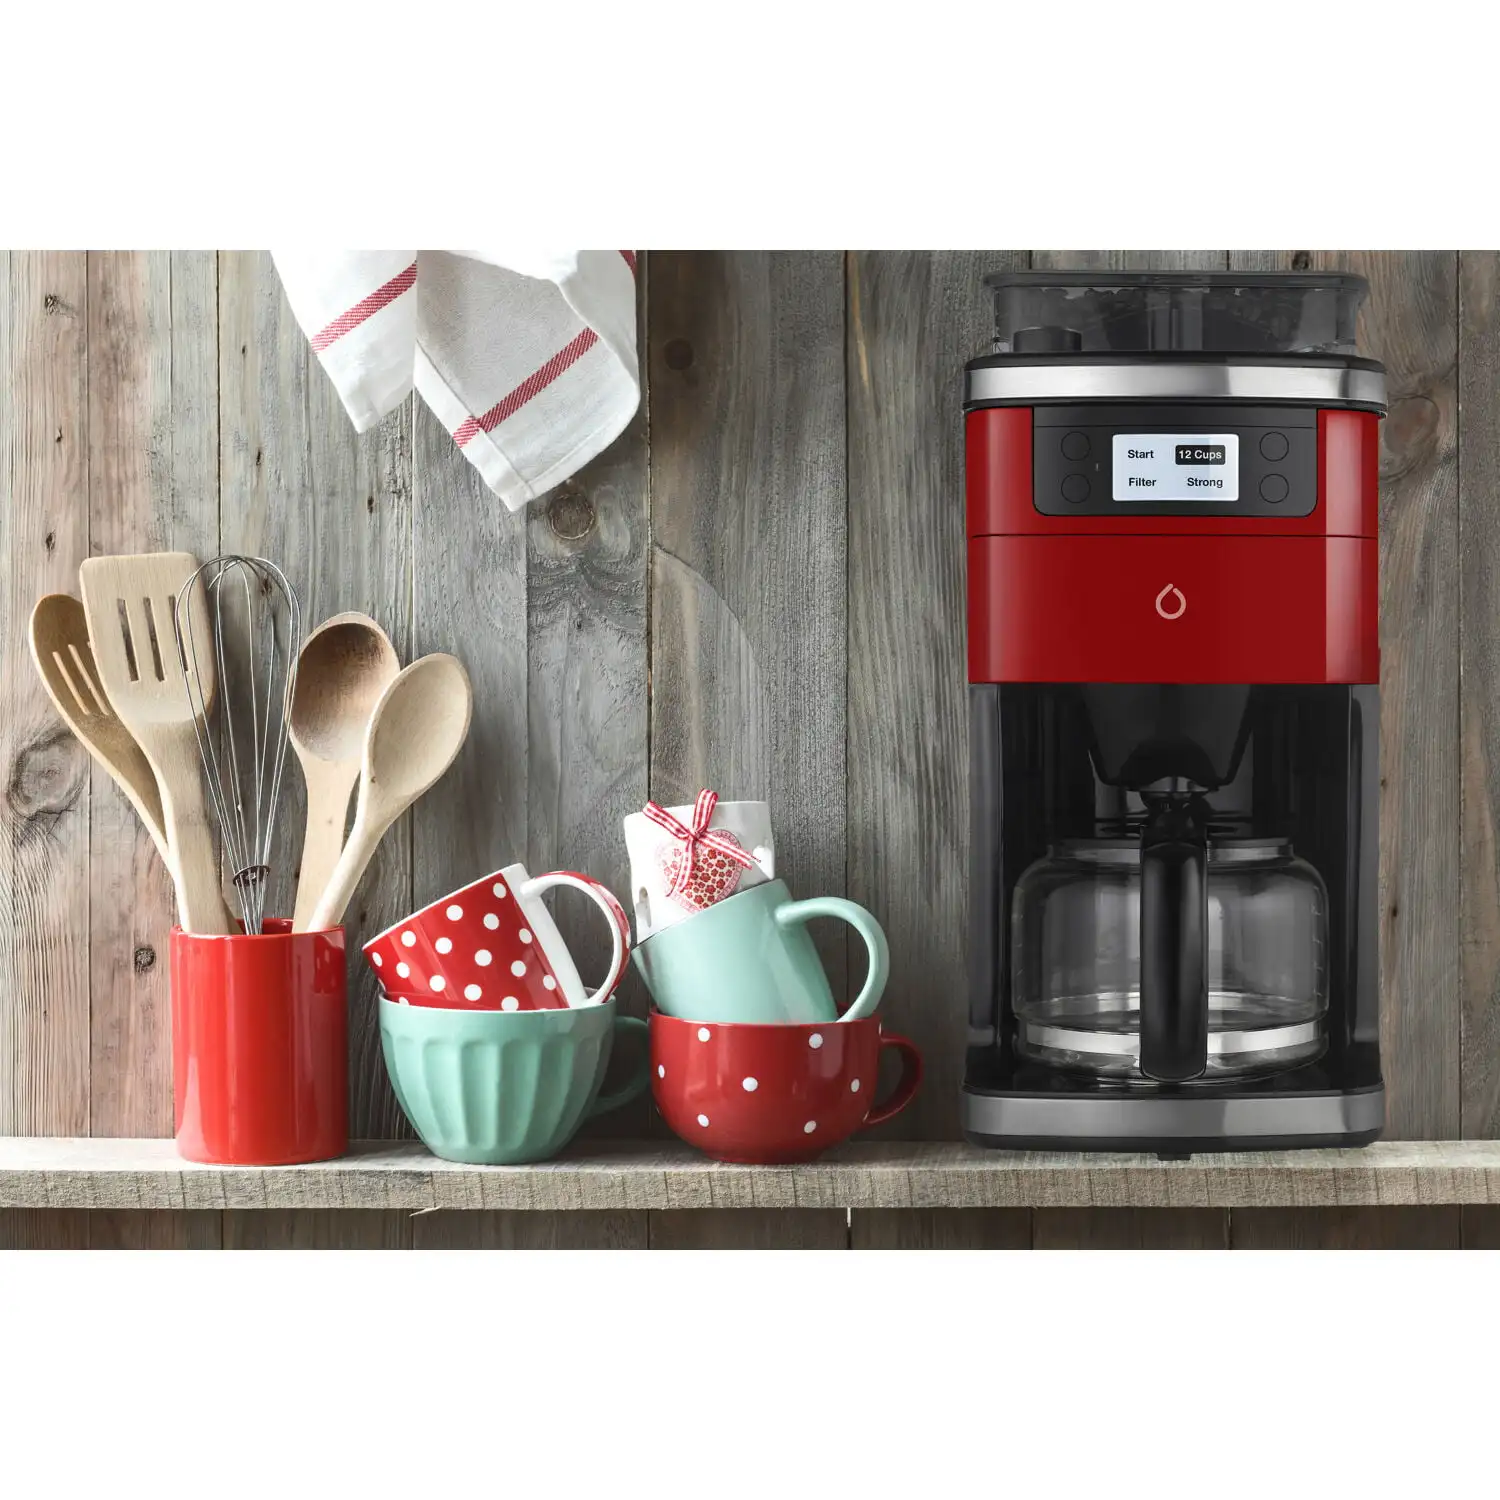 https://ae01.alicdn.com/kf/S74f4375cbe6b467b881ef25dedef1c0f1/Brew-Coffee-Maker-with-Built-in-Grinder-and-Smarter-App-Red-USA-NEW.jpg